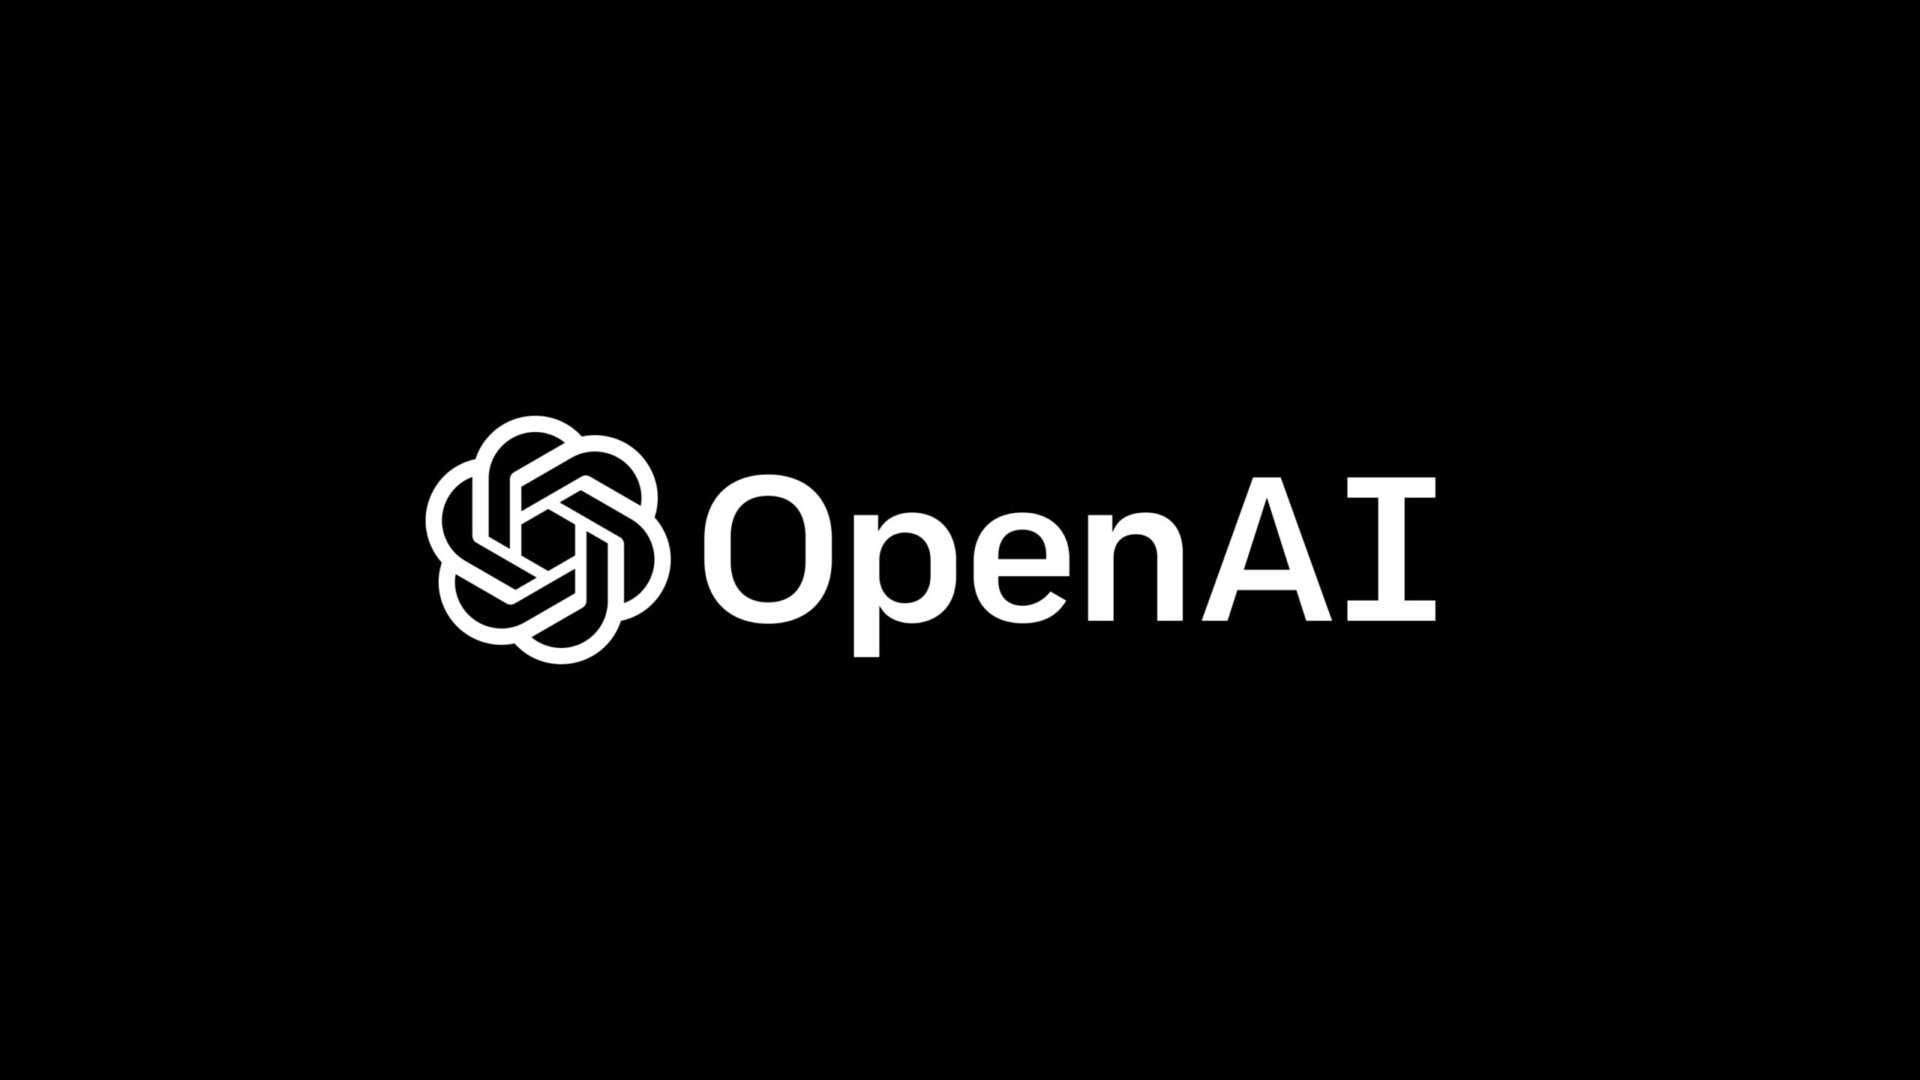 A white logo of OpenAI with a black background